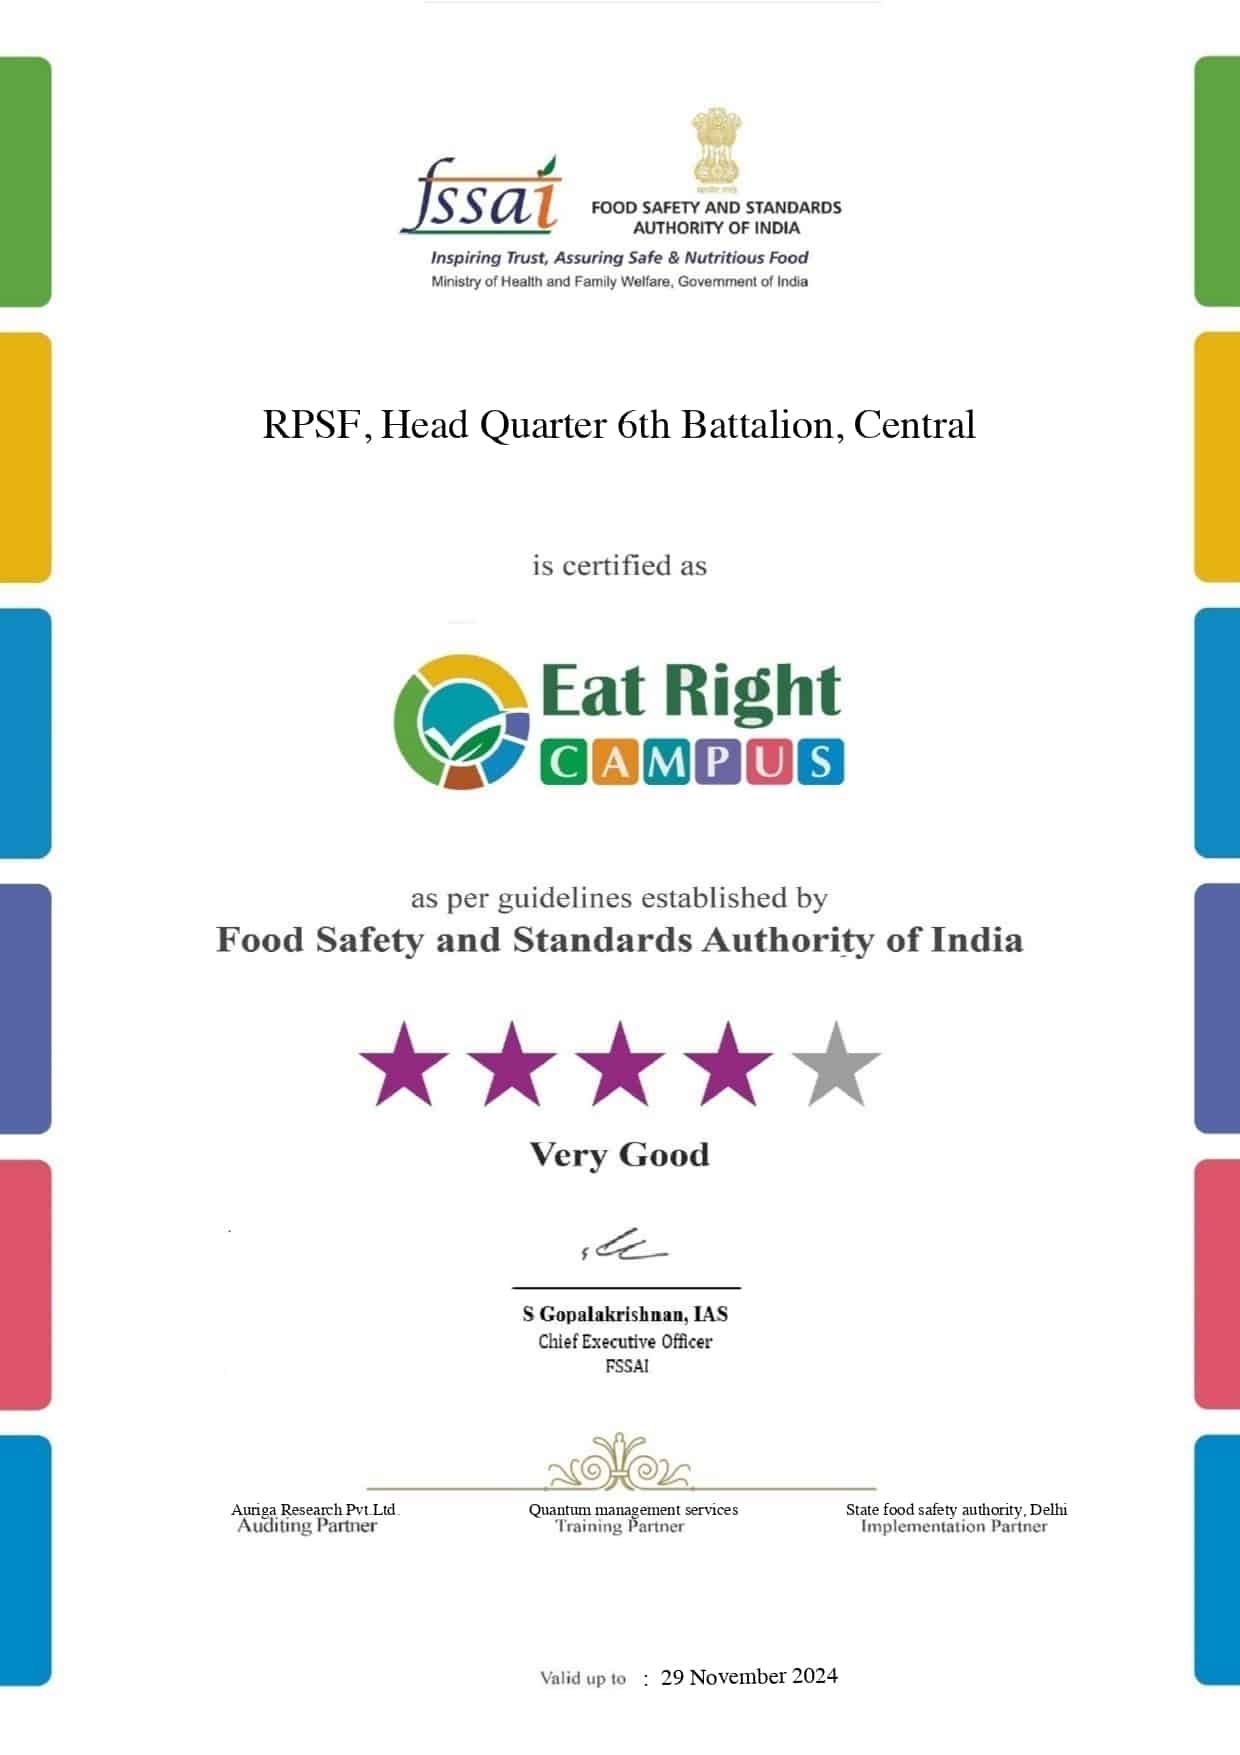 Eat Right Initiatives